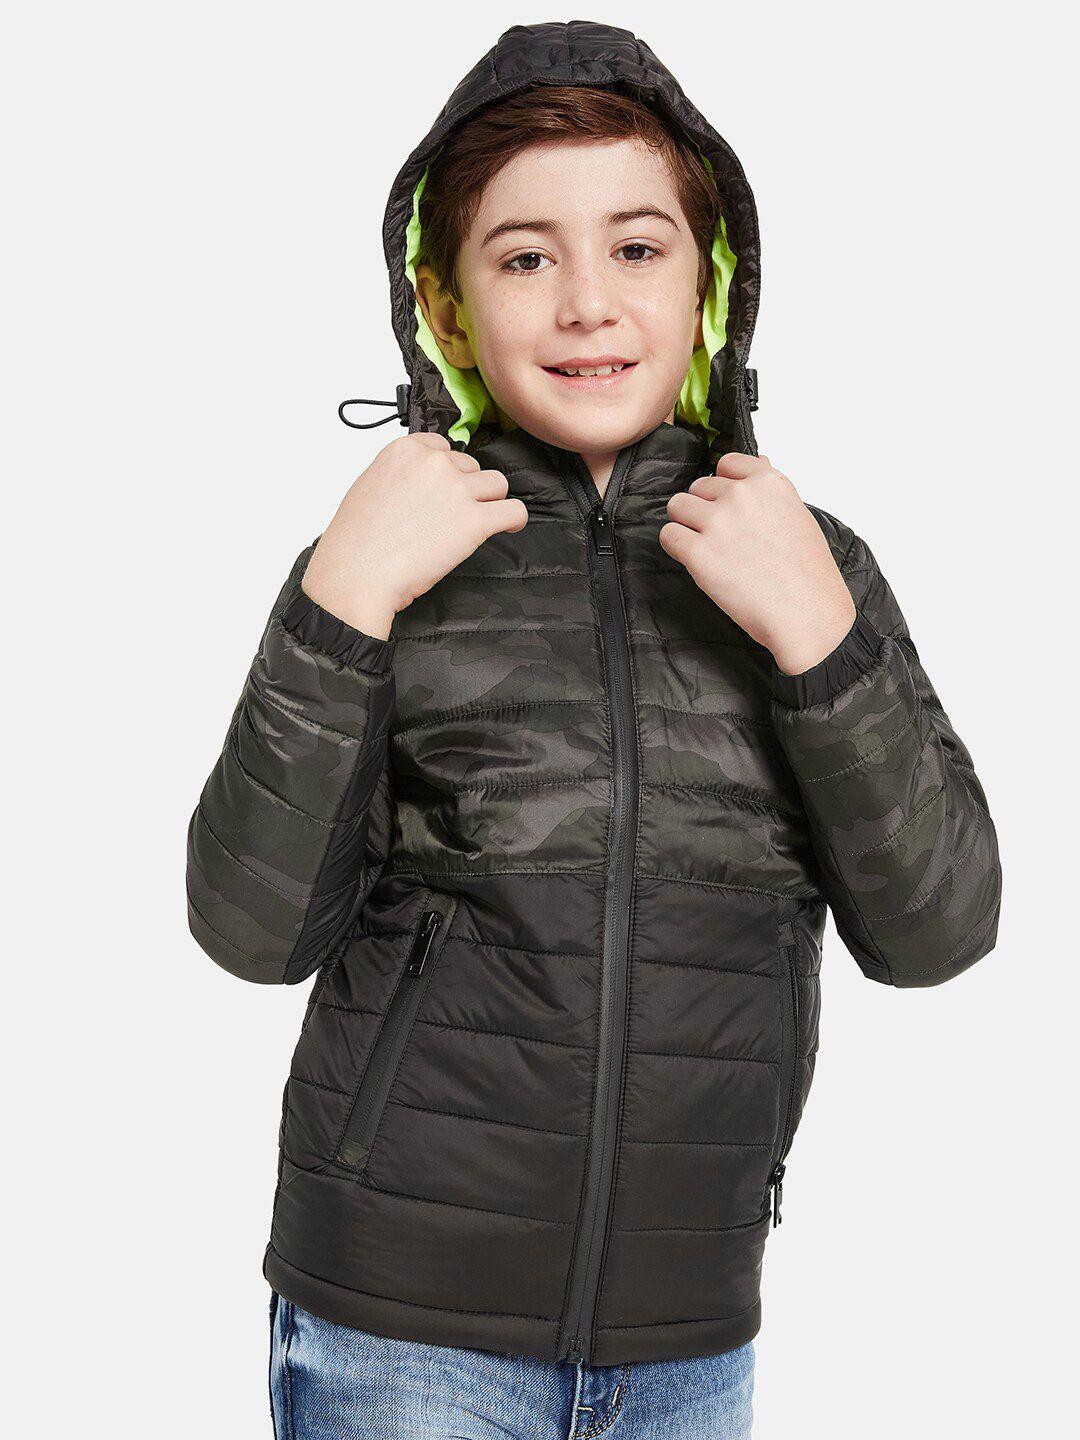 octave boys hooded puffer jacket